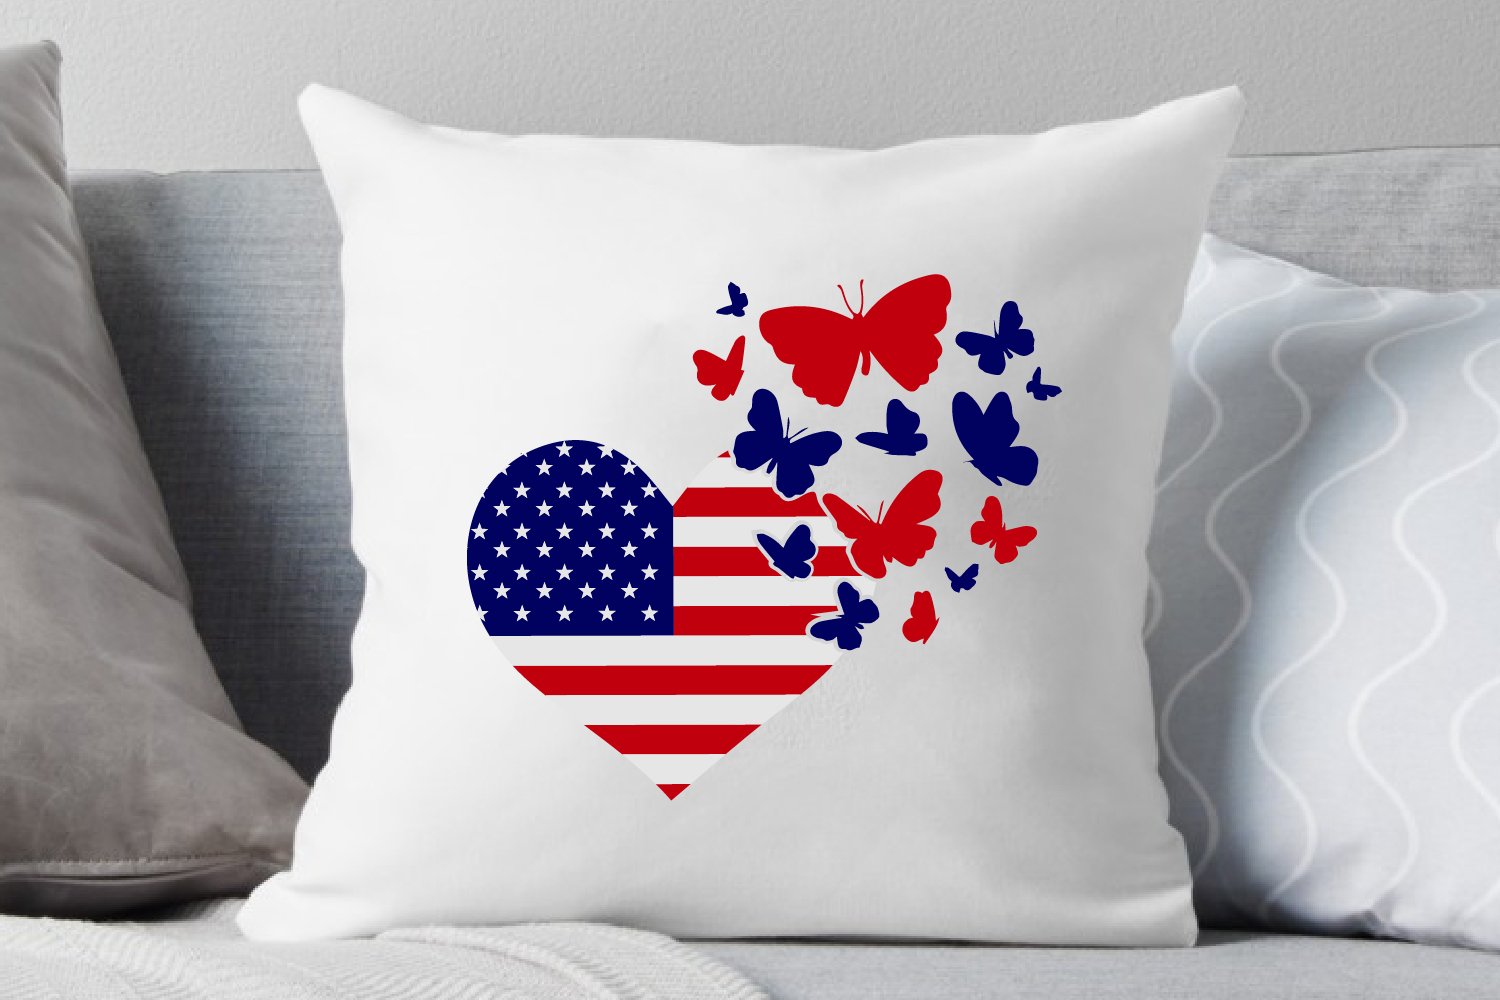 Print on a pillow with a heart with a flap of the USA.